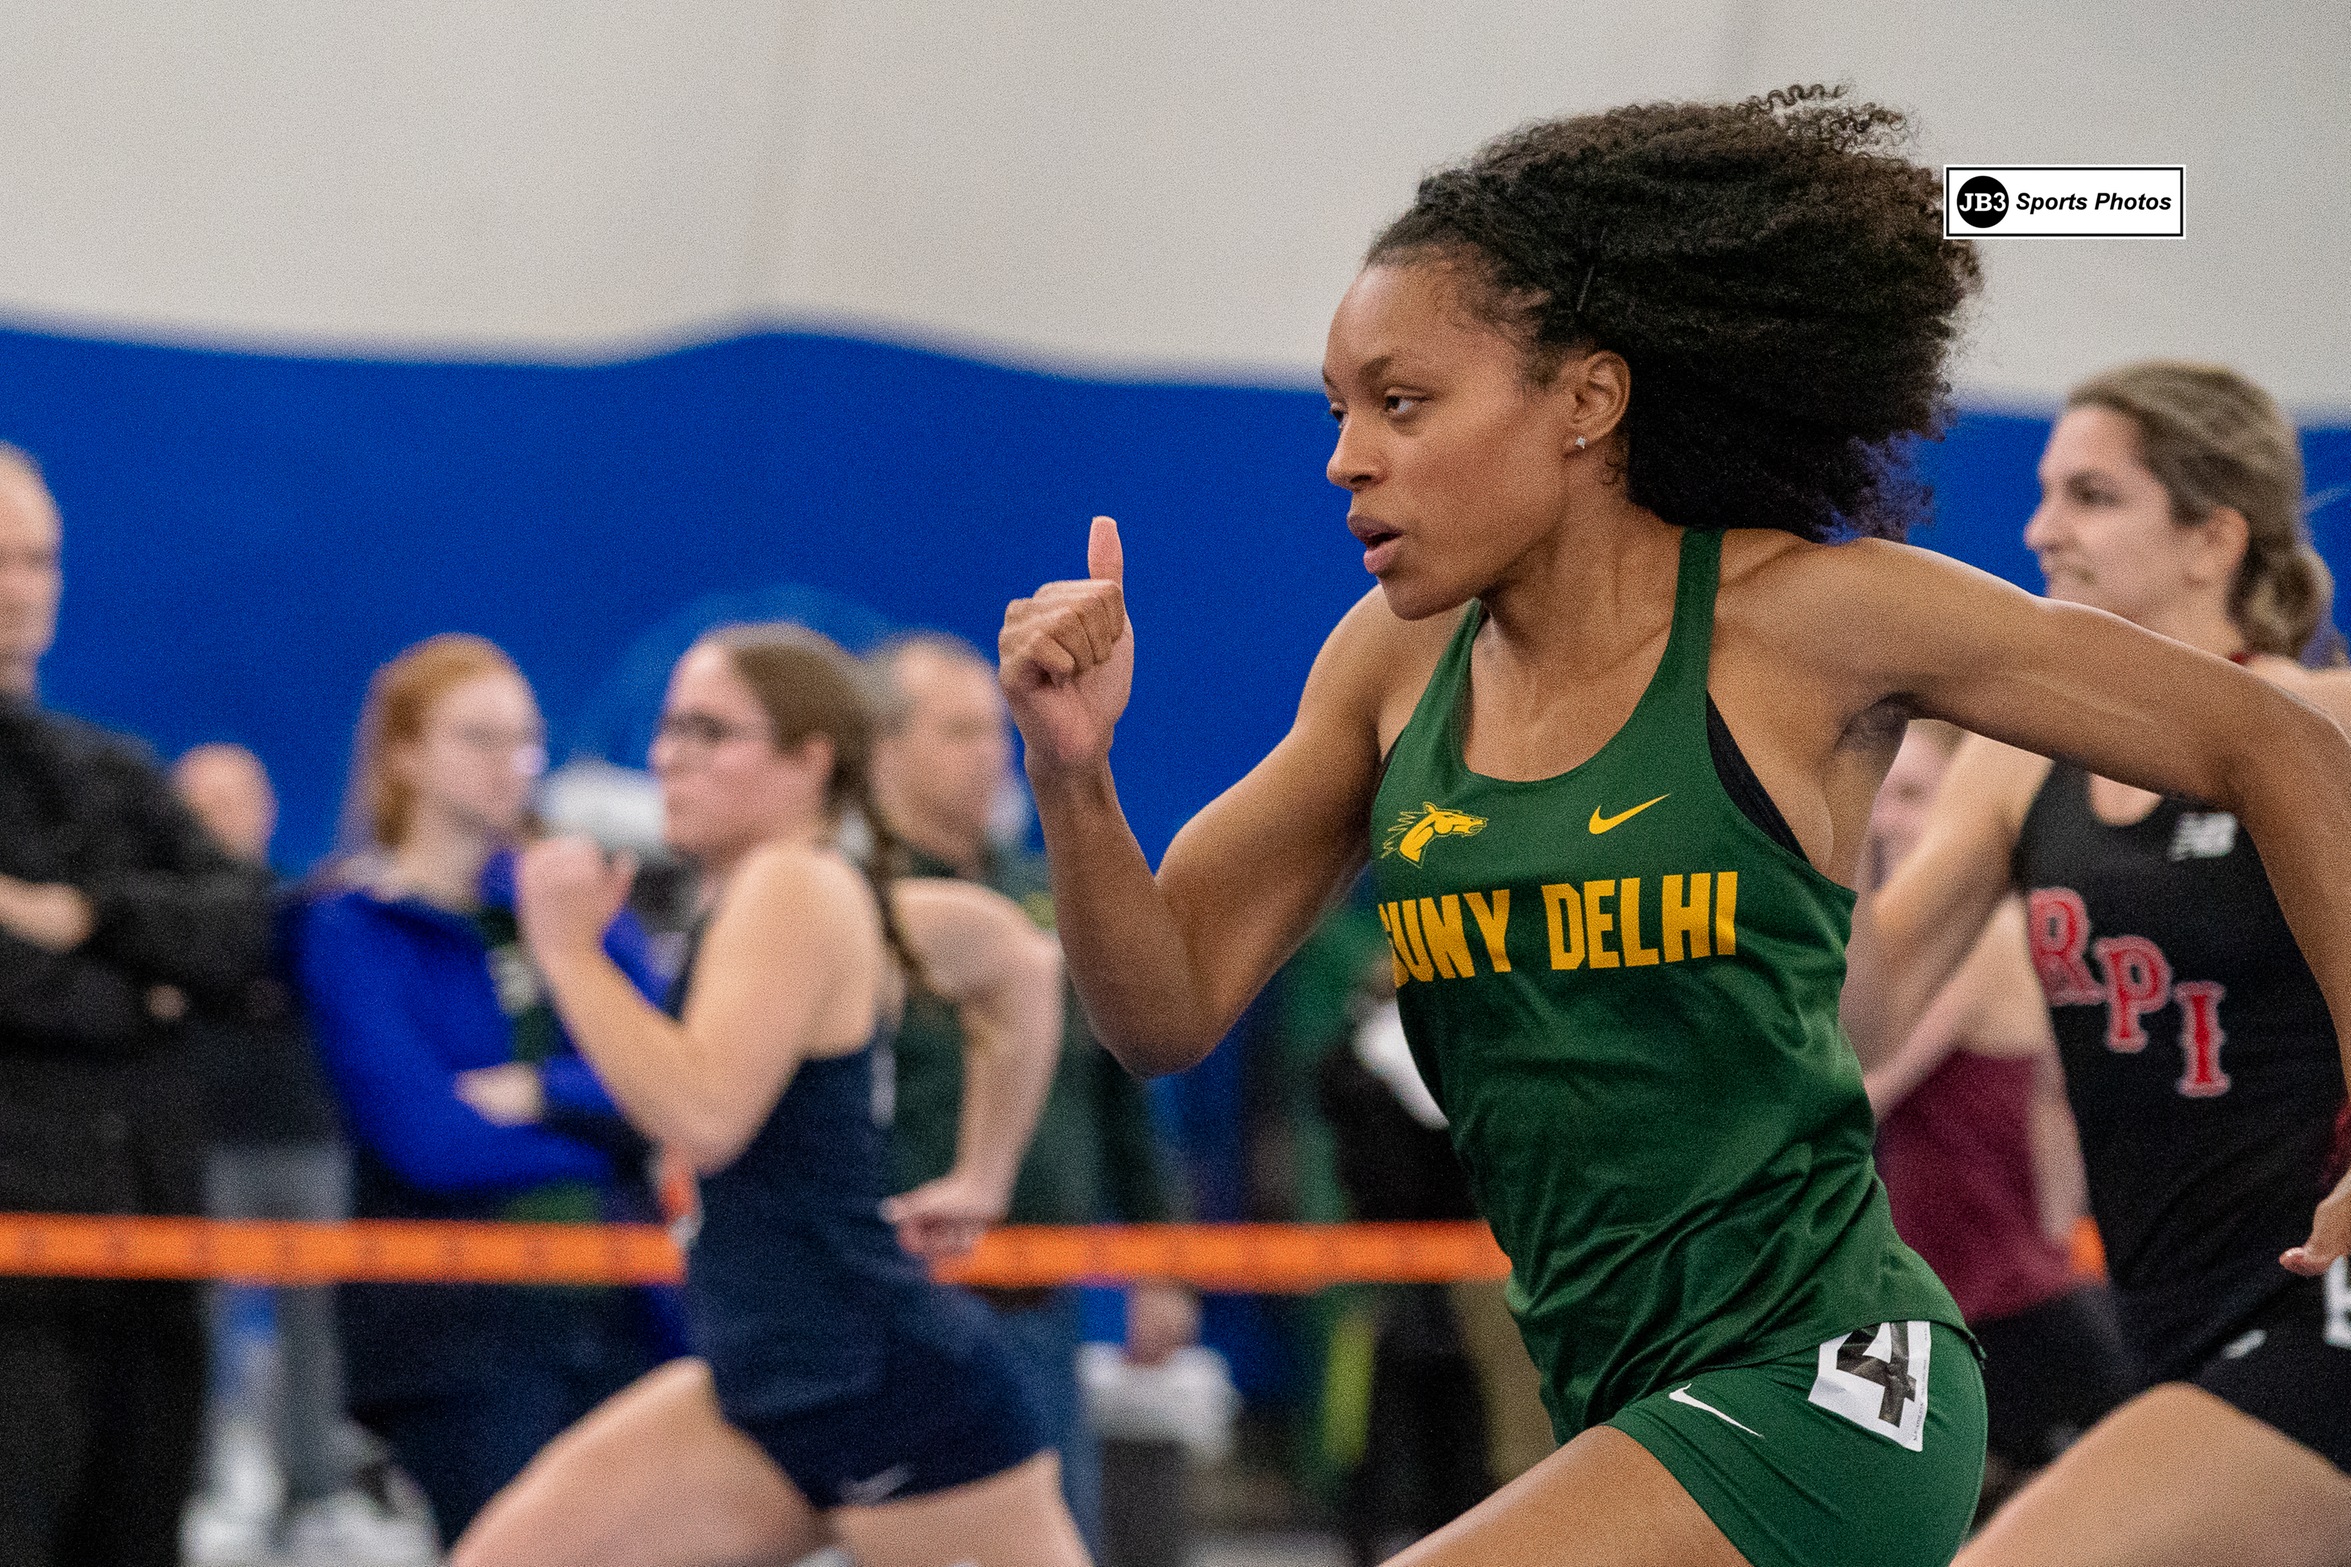 More records fall as Delhi Track & Field traveled to two meets over the weekend